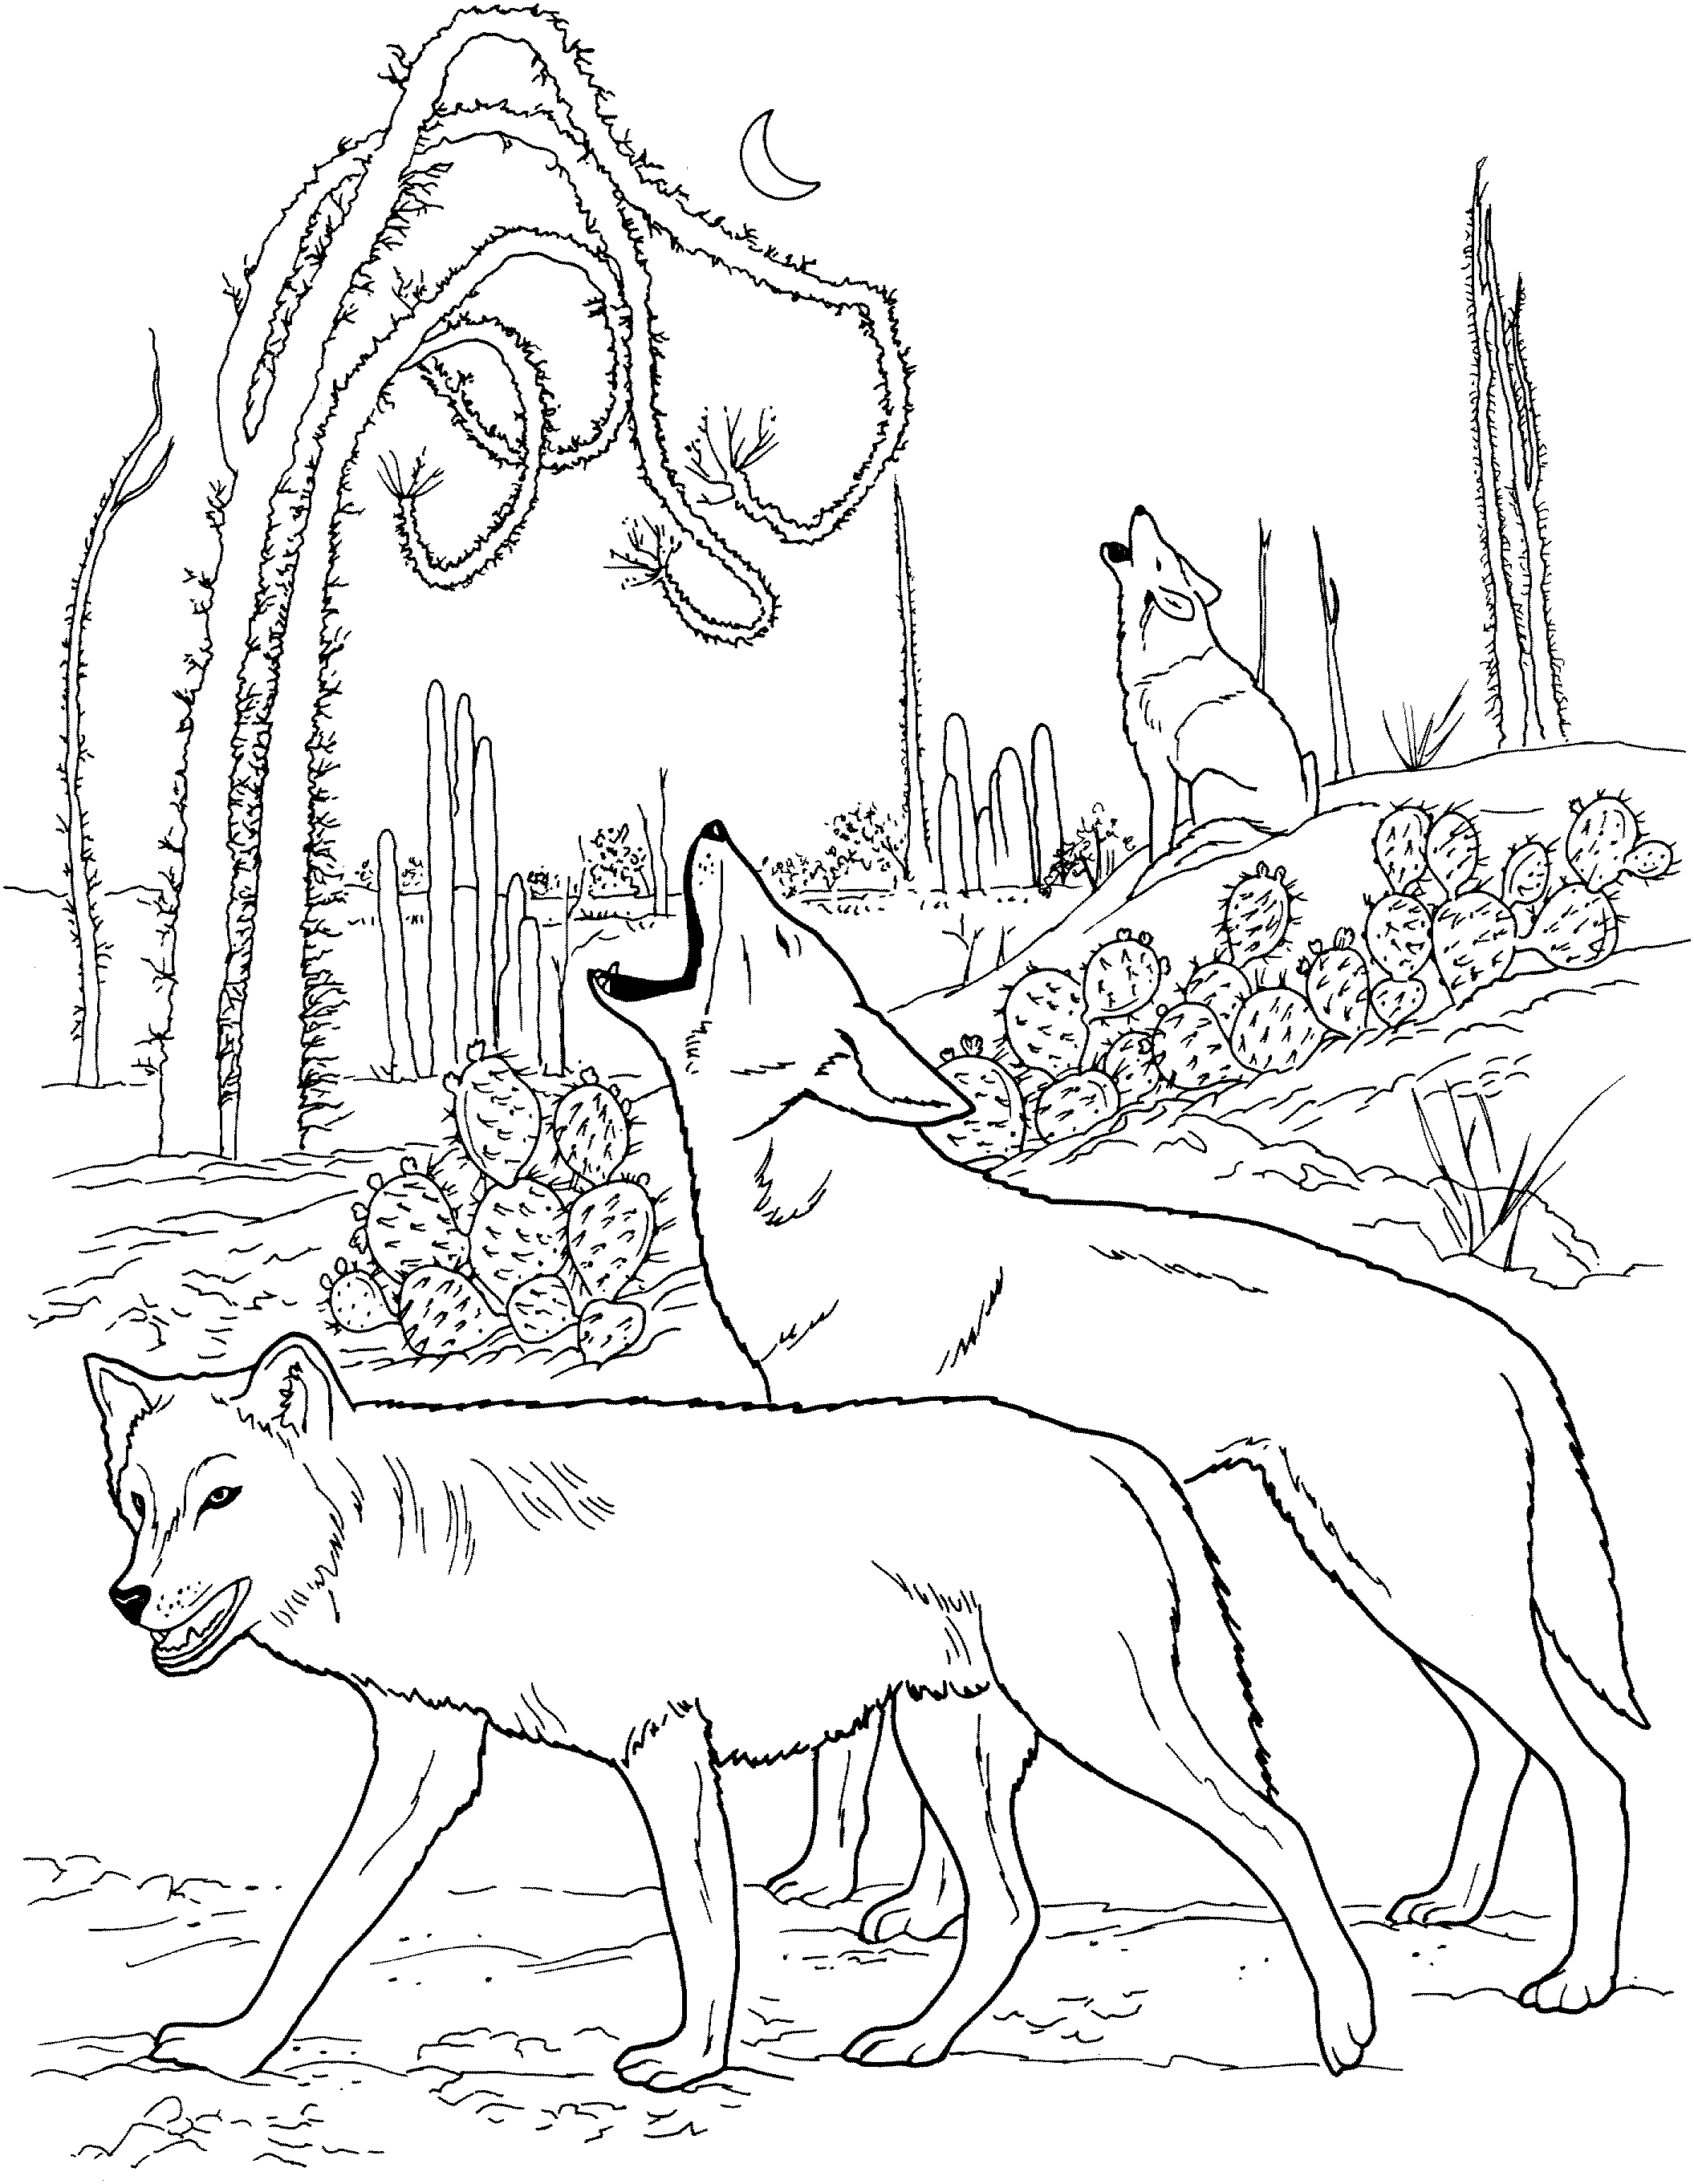 wolves colouring pages wolf drawing for kids at getdrawings free download wolves colouring pages 